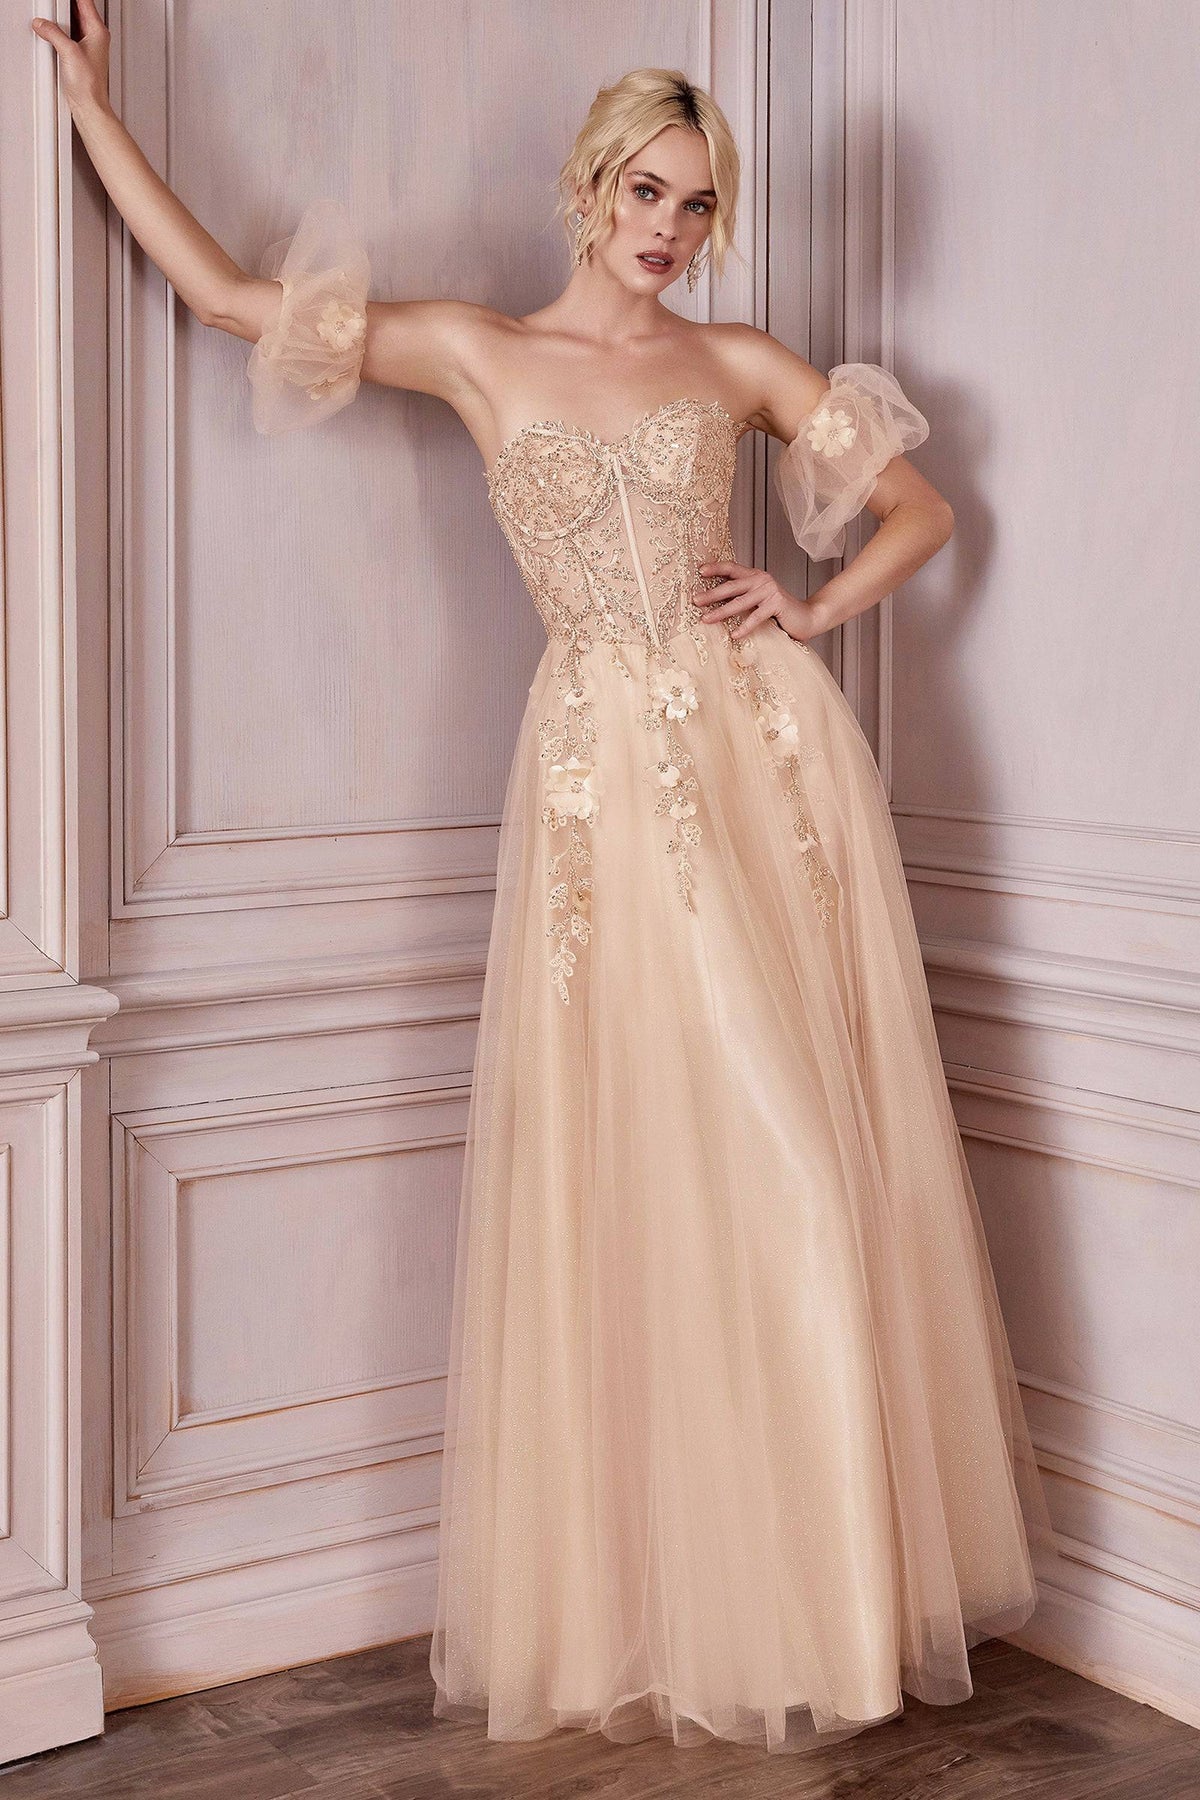 Gorgeous Corset Style Ball Gown With Floral & Rhinestone Embroidery #CDCD0191 | Norma Reed - NORMA REED